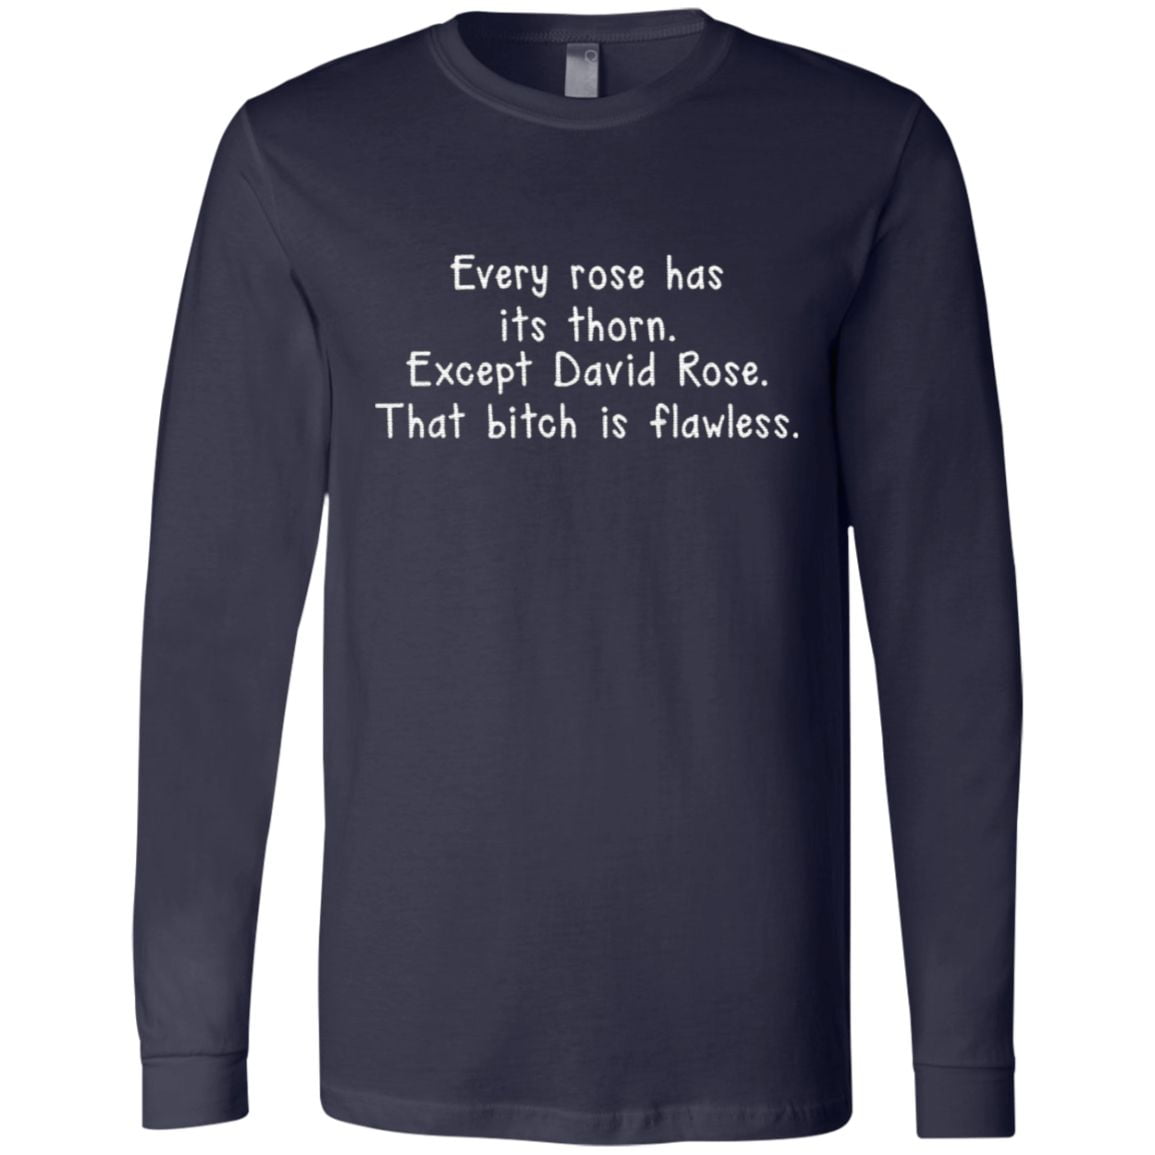 Every rose has its thorn except David Rose t shirt